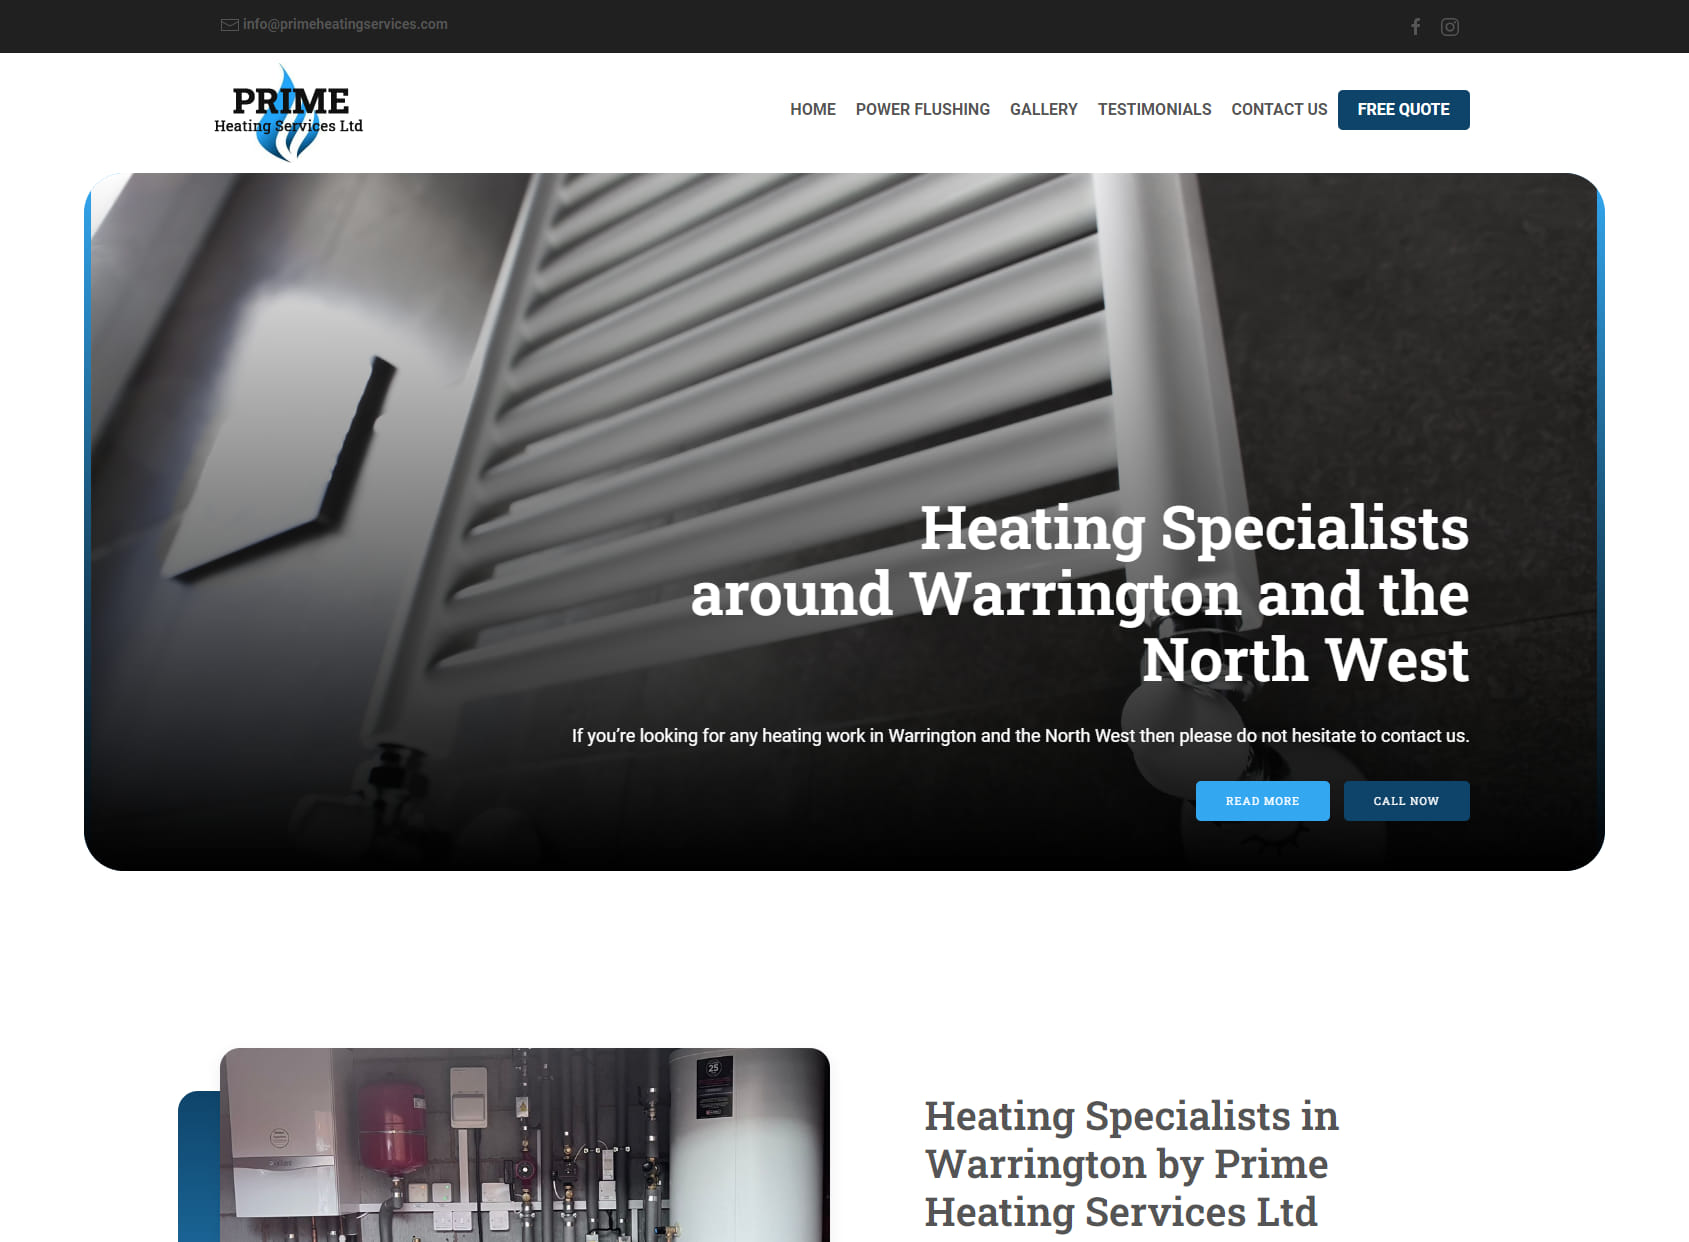 Prime Heating Services Limited